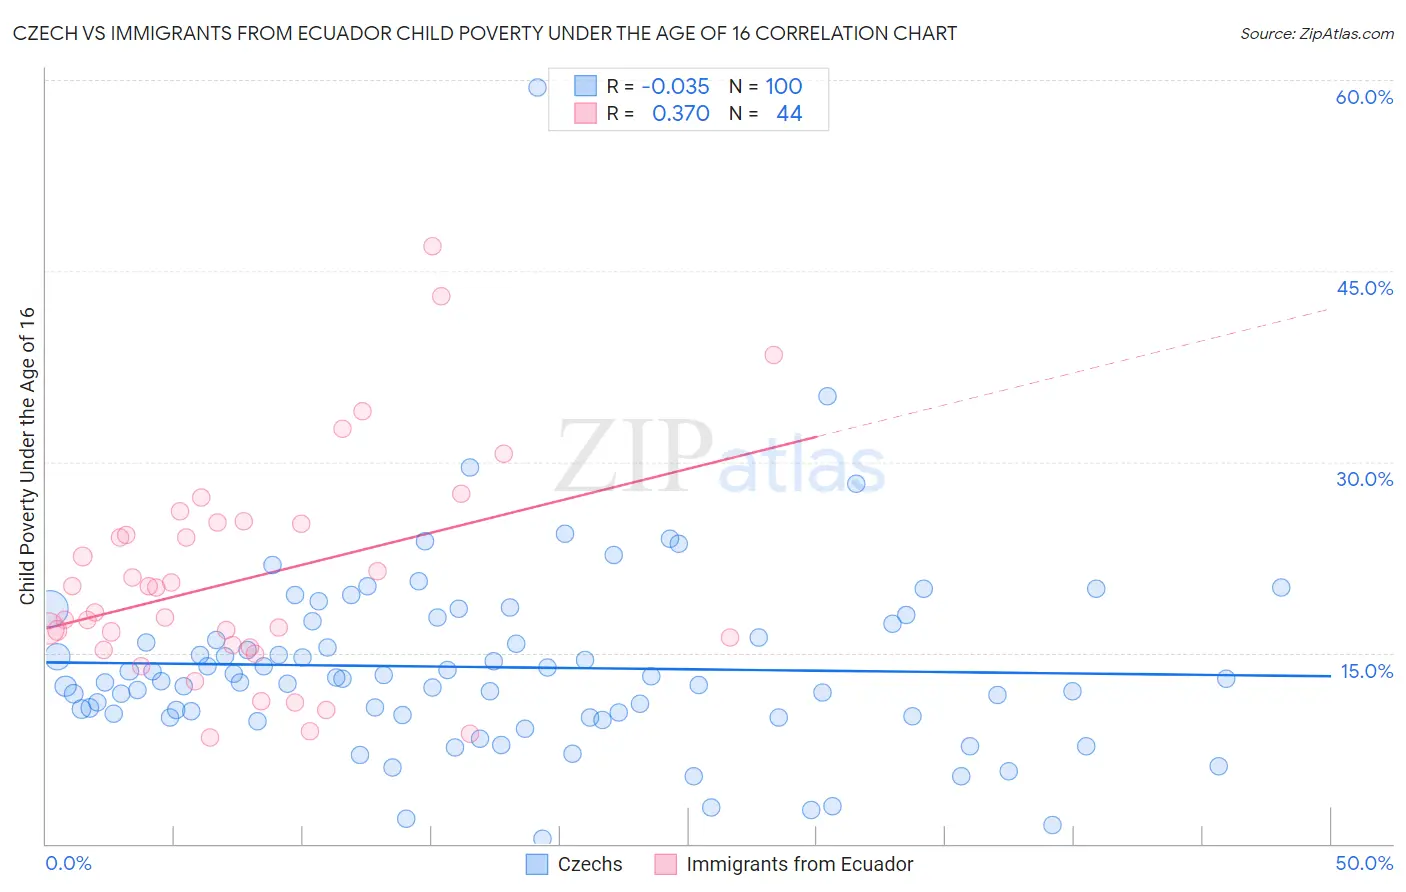 Czech vs Immigrants from Ecuador Child Poverty Under the Age of 16